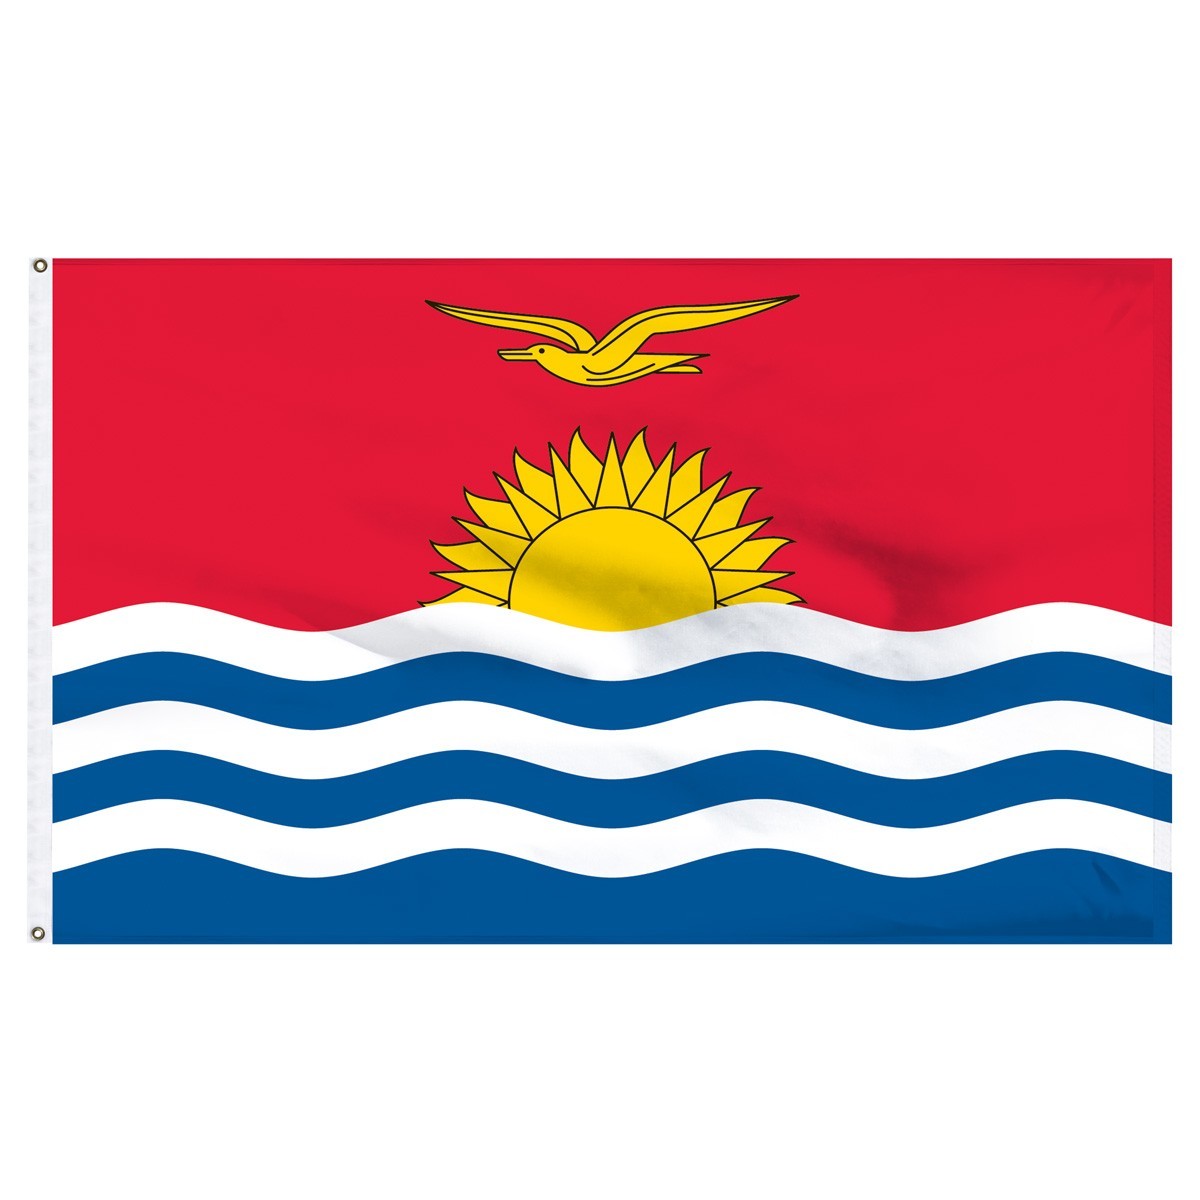 Shop Kiribati high quality world flags for sale, all sizes